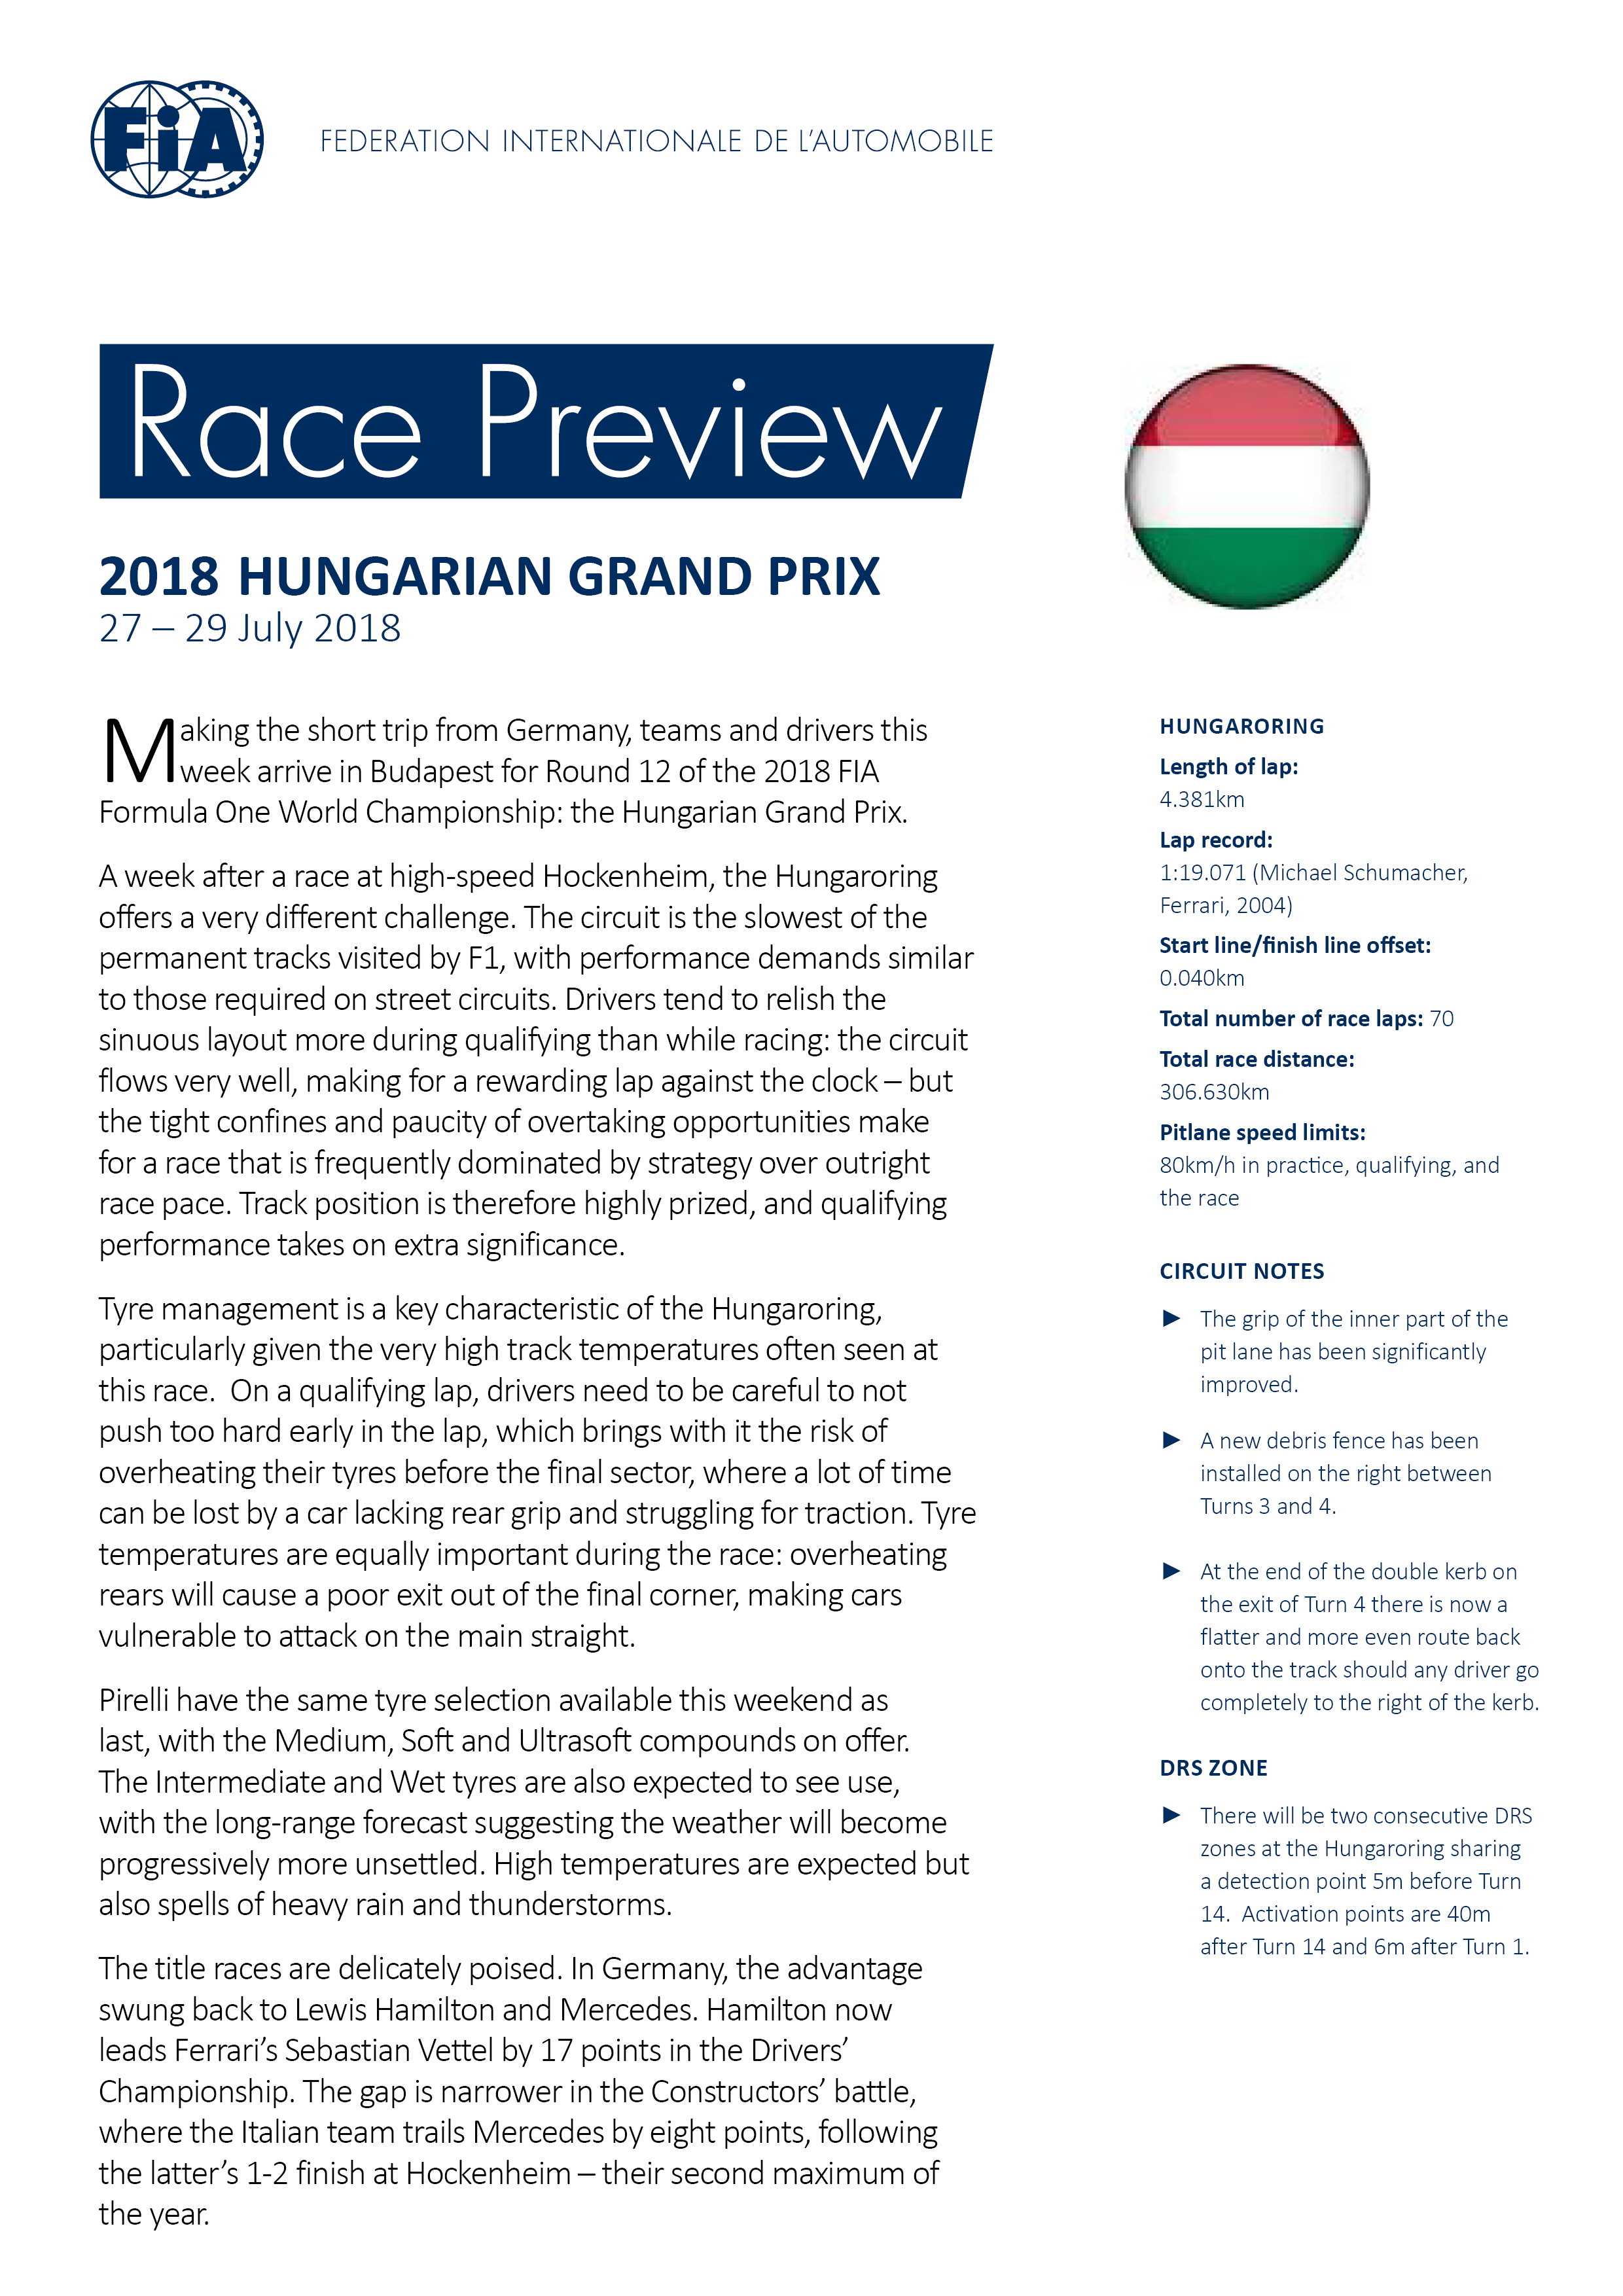 Hungarian Race Preview